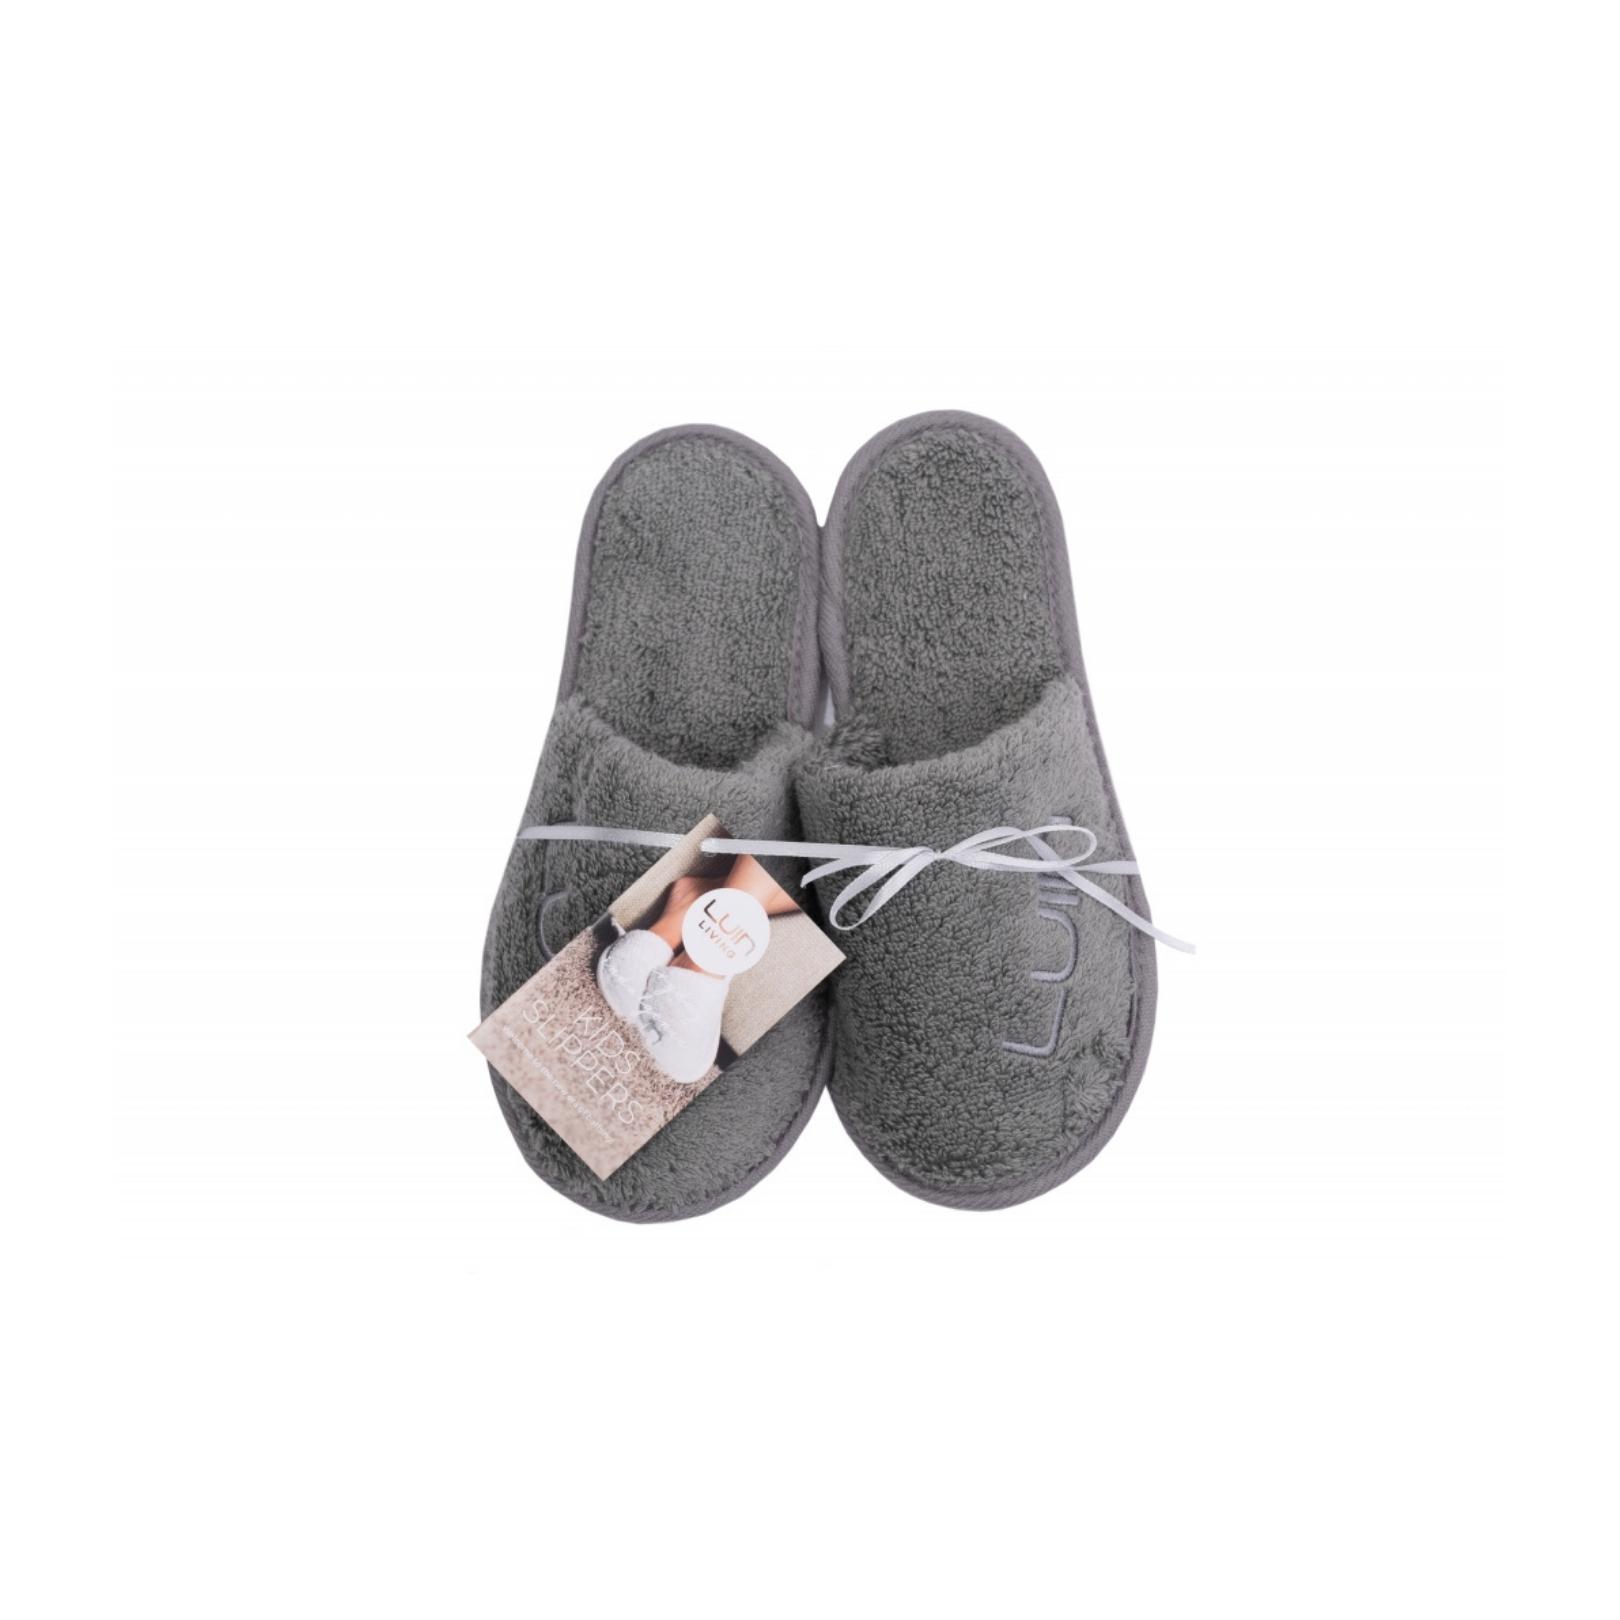 Kids slippers 34-36 granite Luin Living Your Home Your Spa